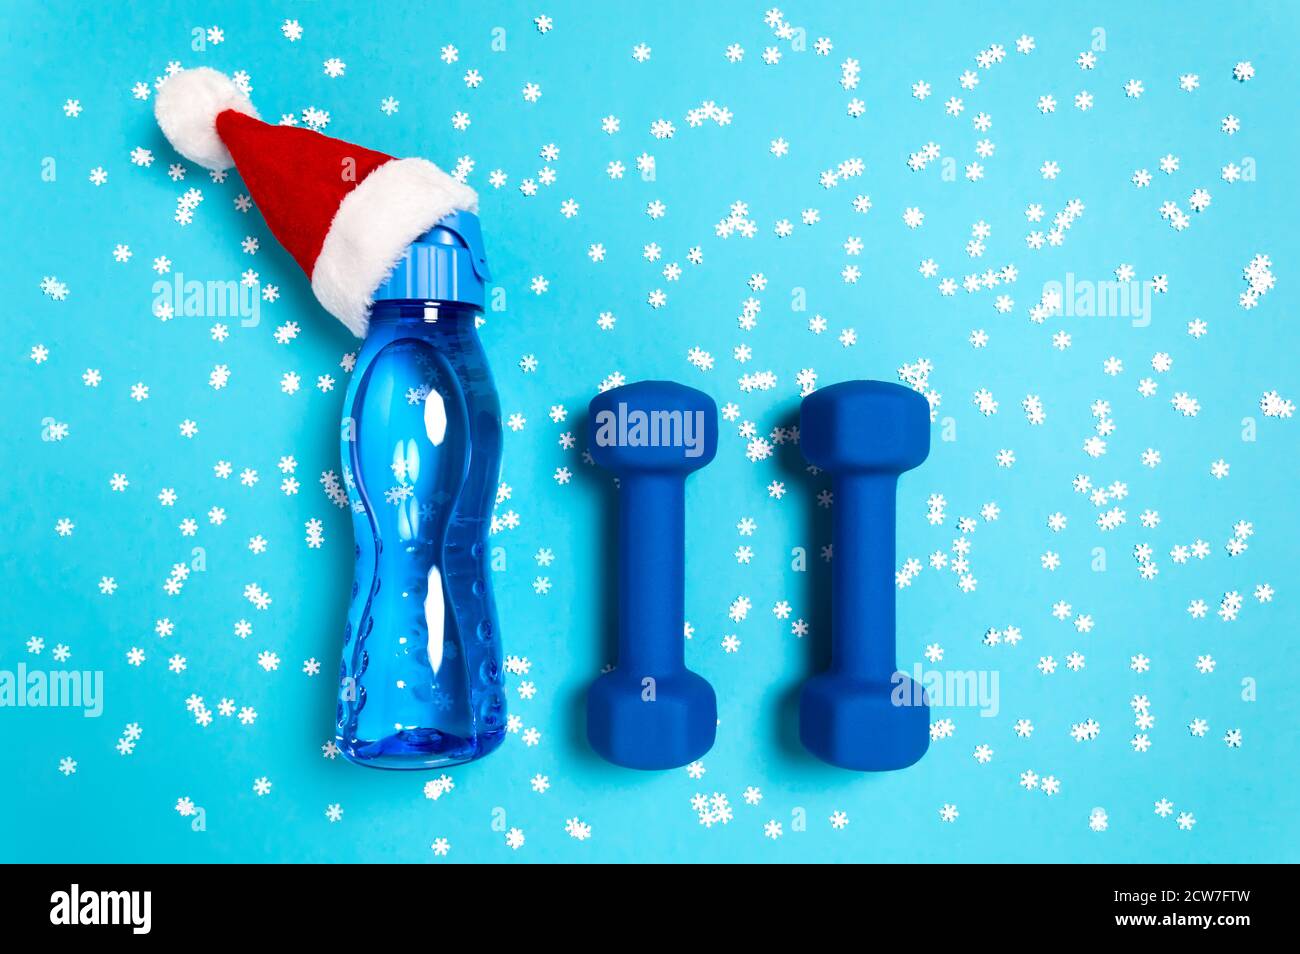 Christmas sport flat lay with dumbbells and water bottle in red Santa's hat on blue background with snowflakes. Christmas and new year holiday concept Stock Photo